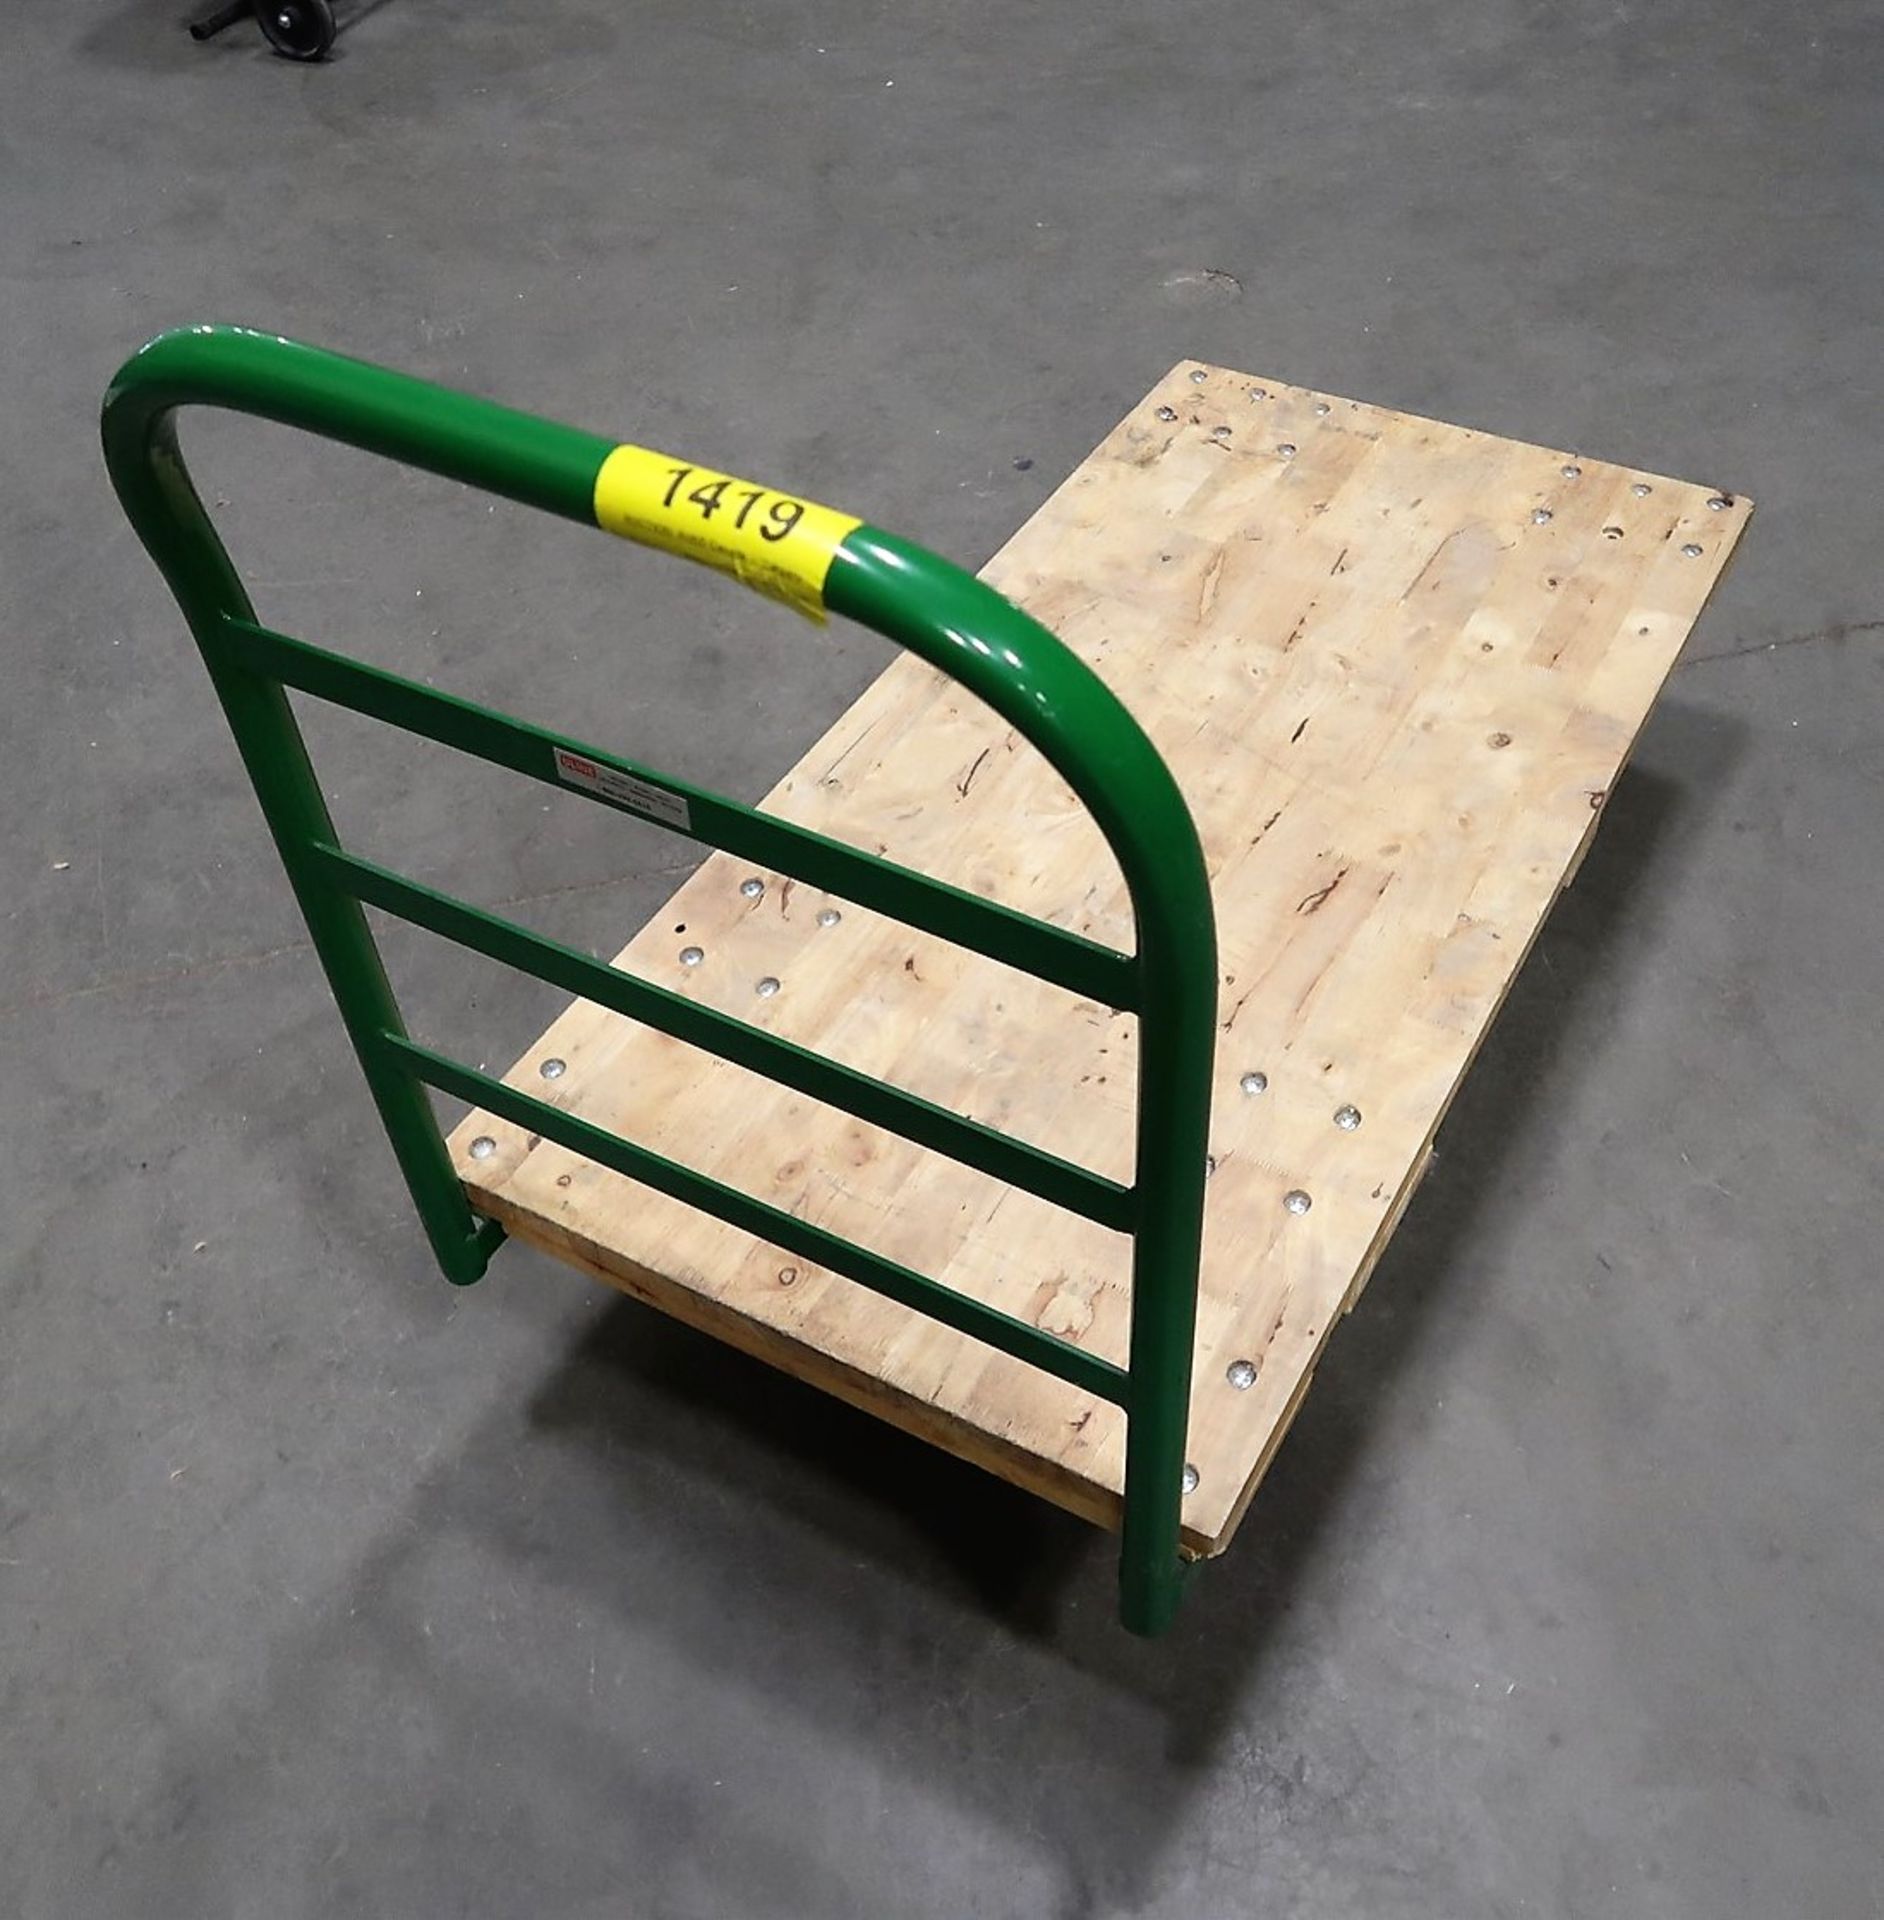 WOOD/METAL SHOP CART 4 FT. X 2 FT. (SUBJECT TO LATE REMOVAL, PICKUP ON JULY 7TH)